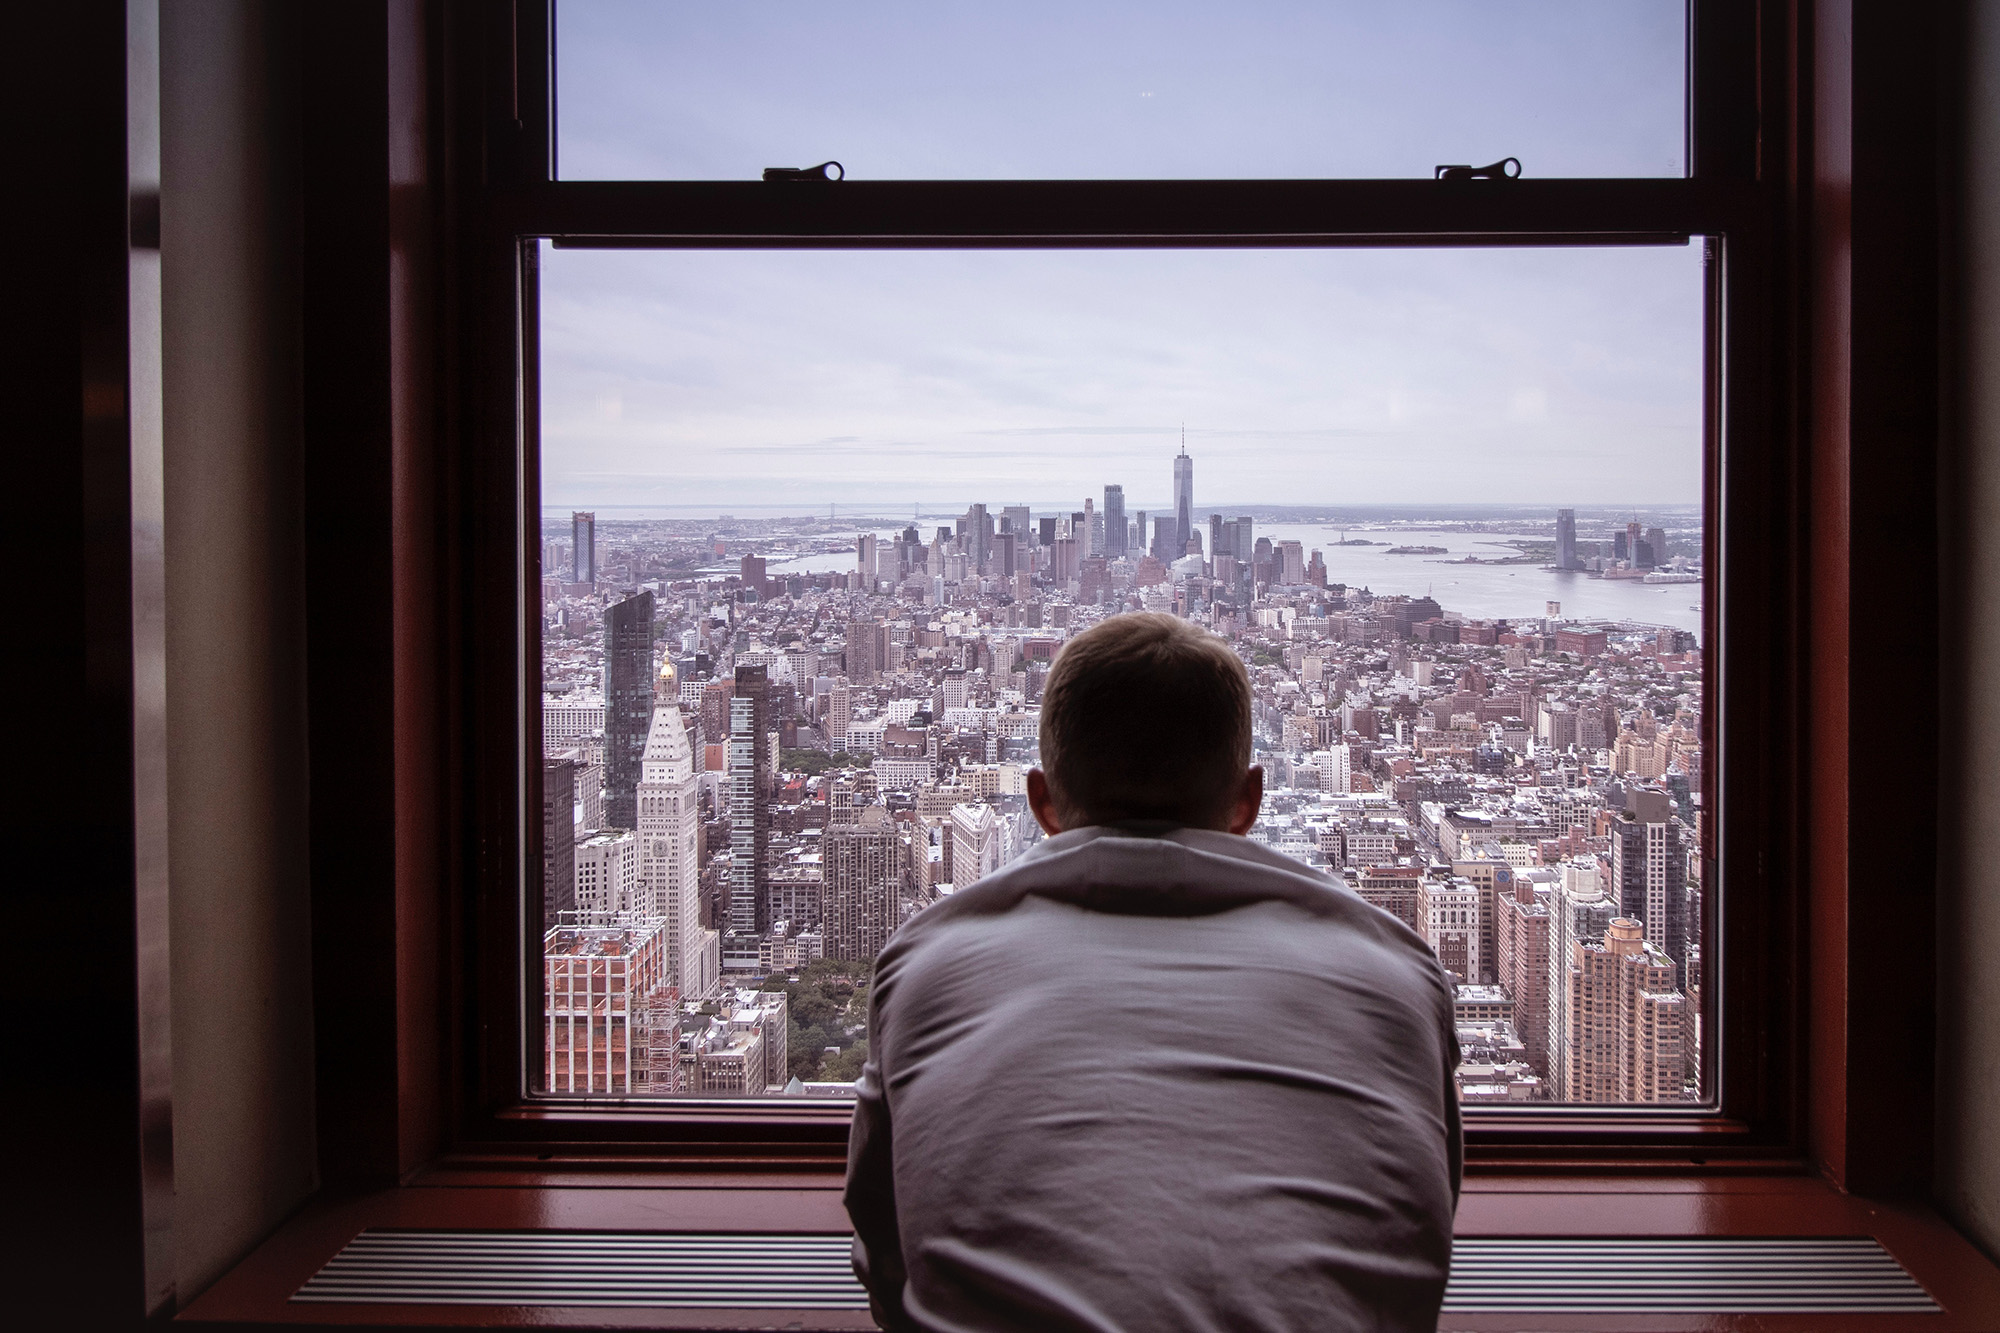 Photo of man leaning out window looking out over city skyline